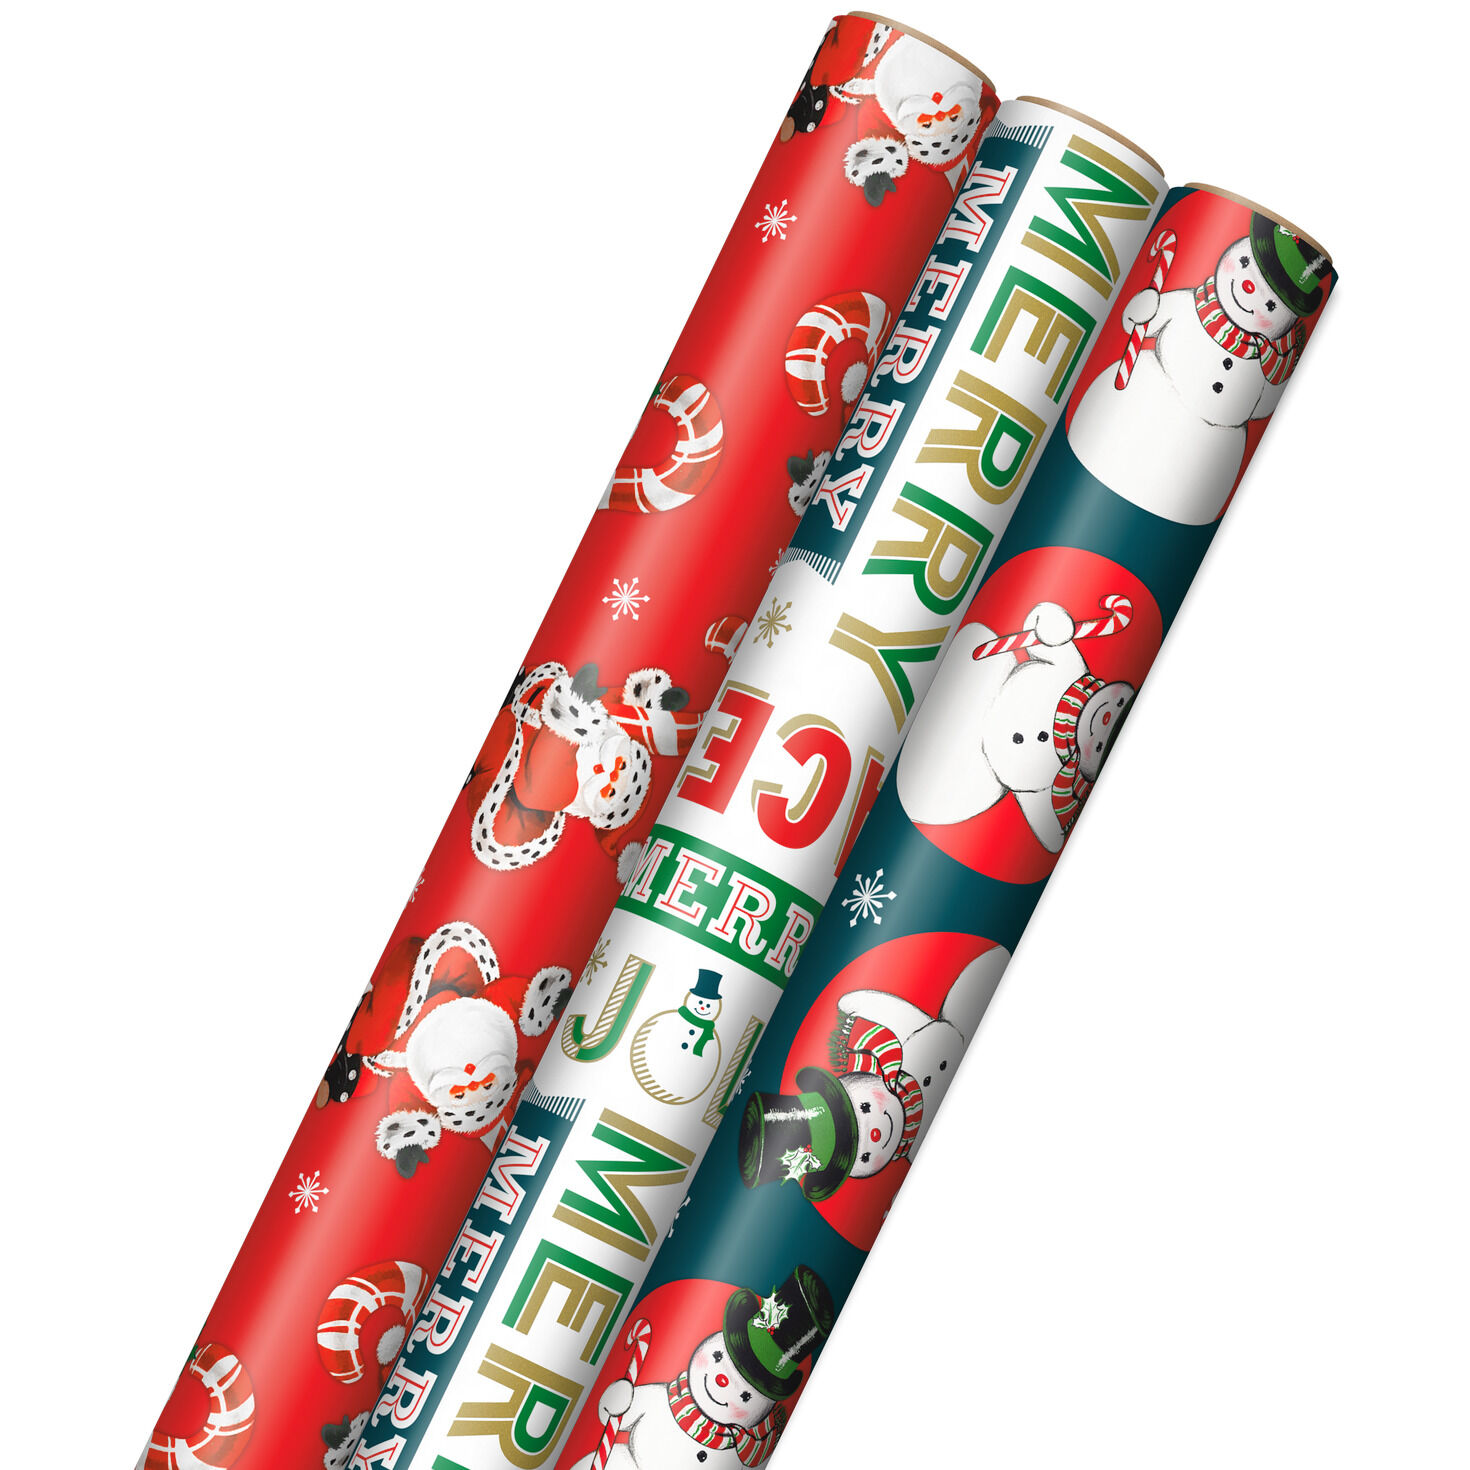 Retro Technology. Wrapping Paper